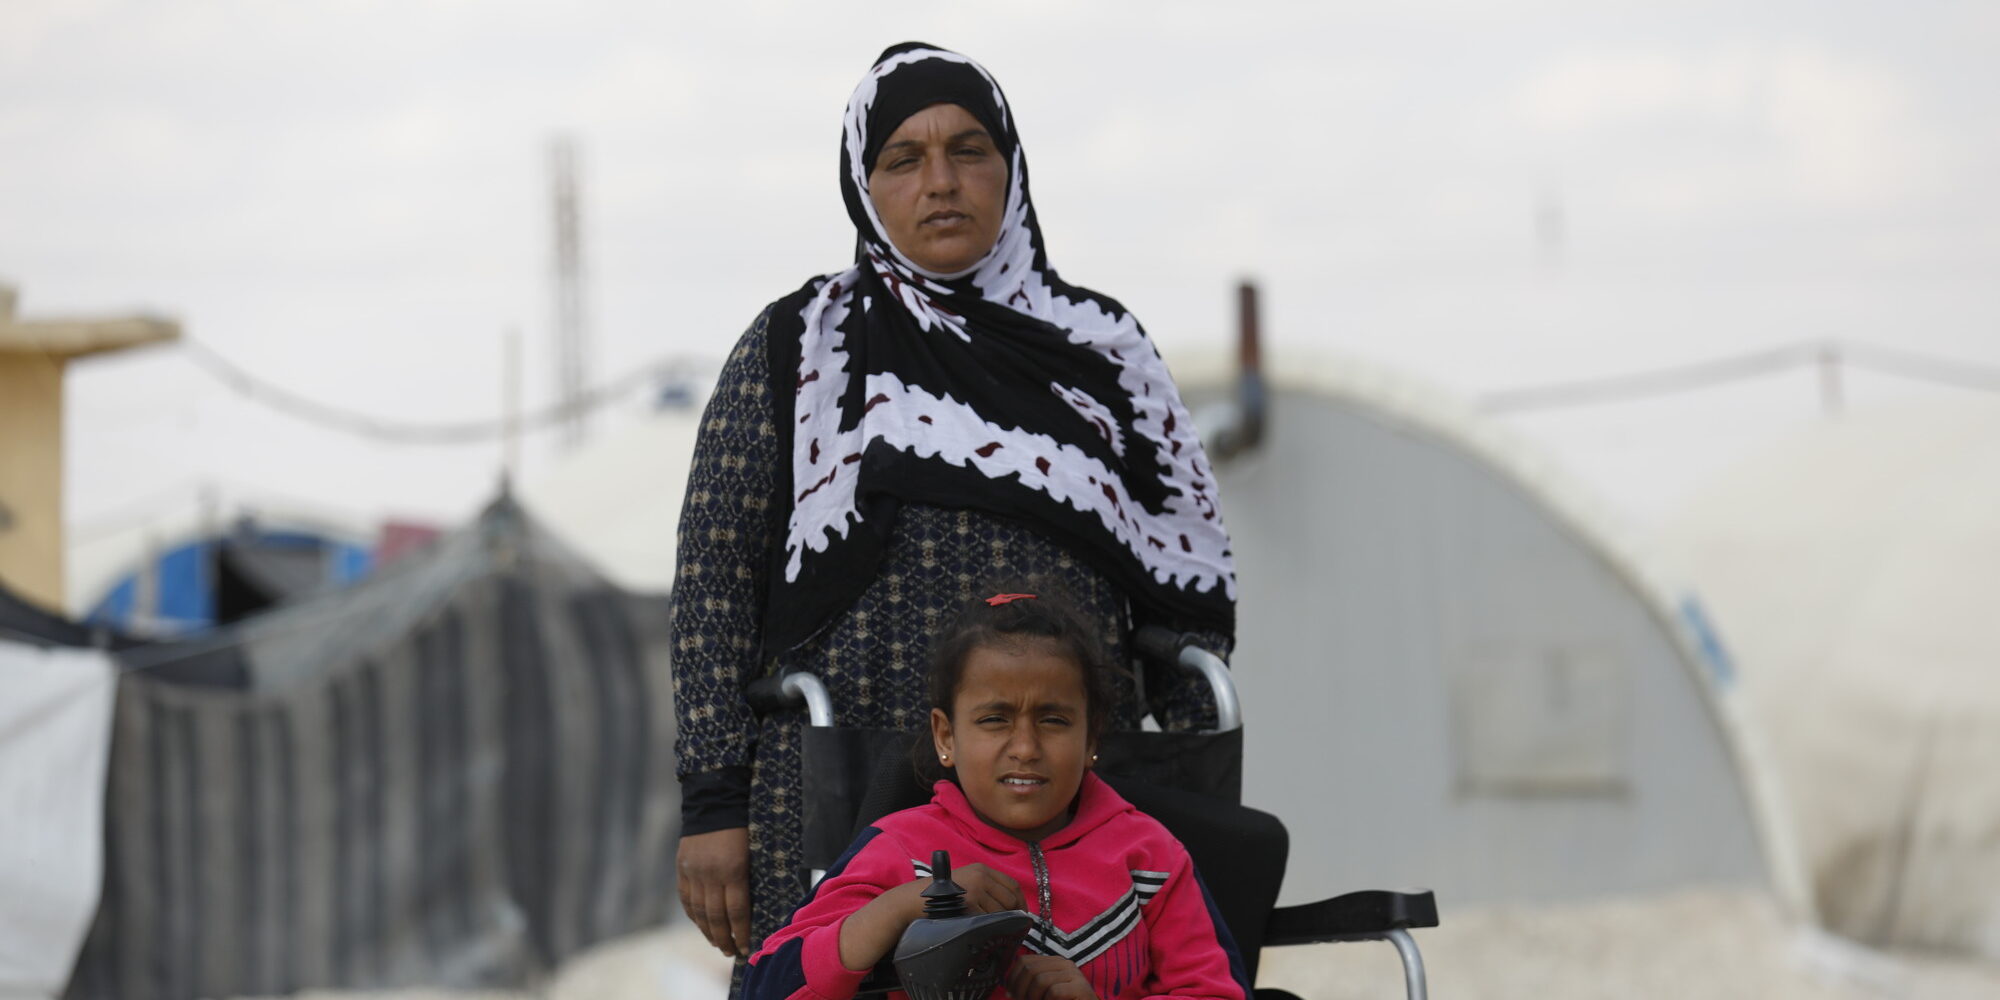 A young girl, Bushra who is in a wheelchair, pictured with her mother in an informal settlement for displaced persons. Photo: Delil Souleiman/CARE